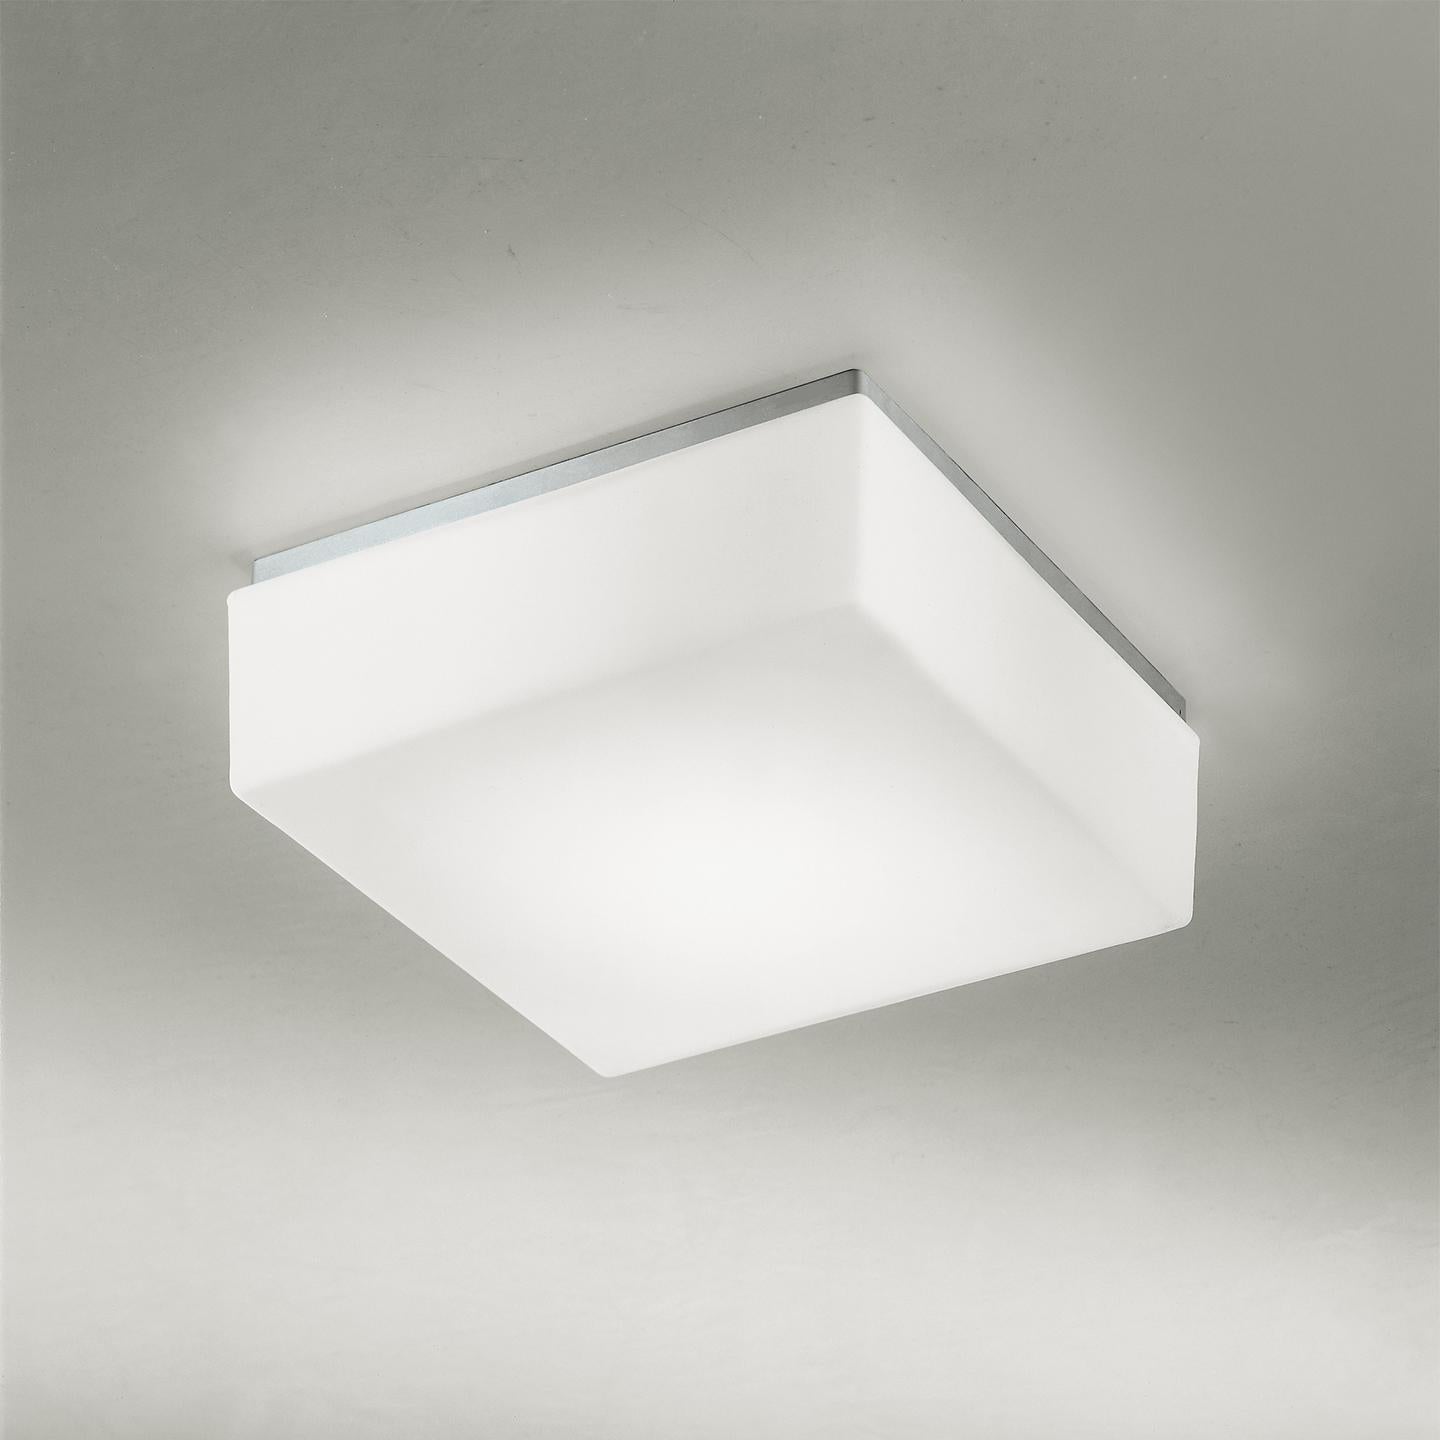 The cubi ceiling/wall lamp, designed in 2000, is an icon of Leucos. Its cubic form is surprising for handmade glass, which makes it a delightful lamp. Its hand blown satin white diffuser is made of multiple layers of glass to create a rich, white